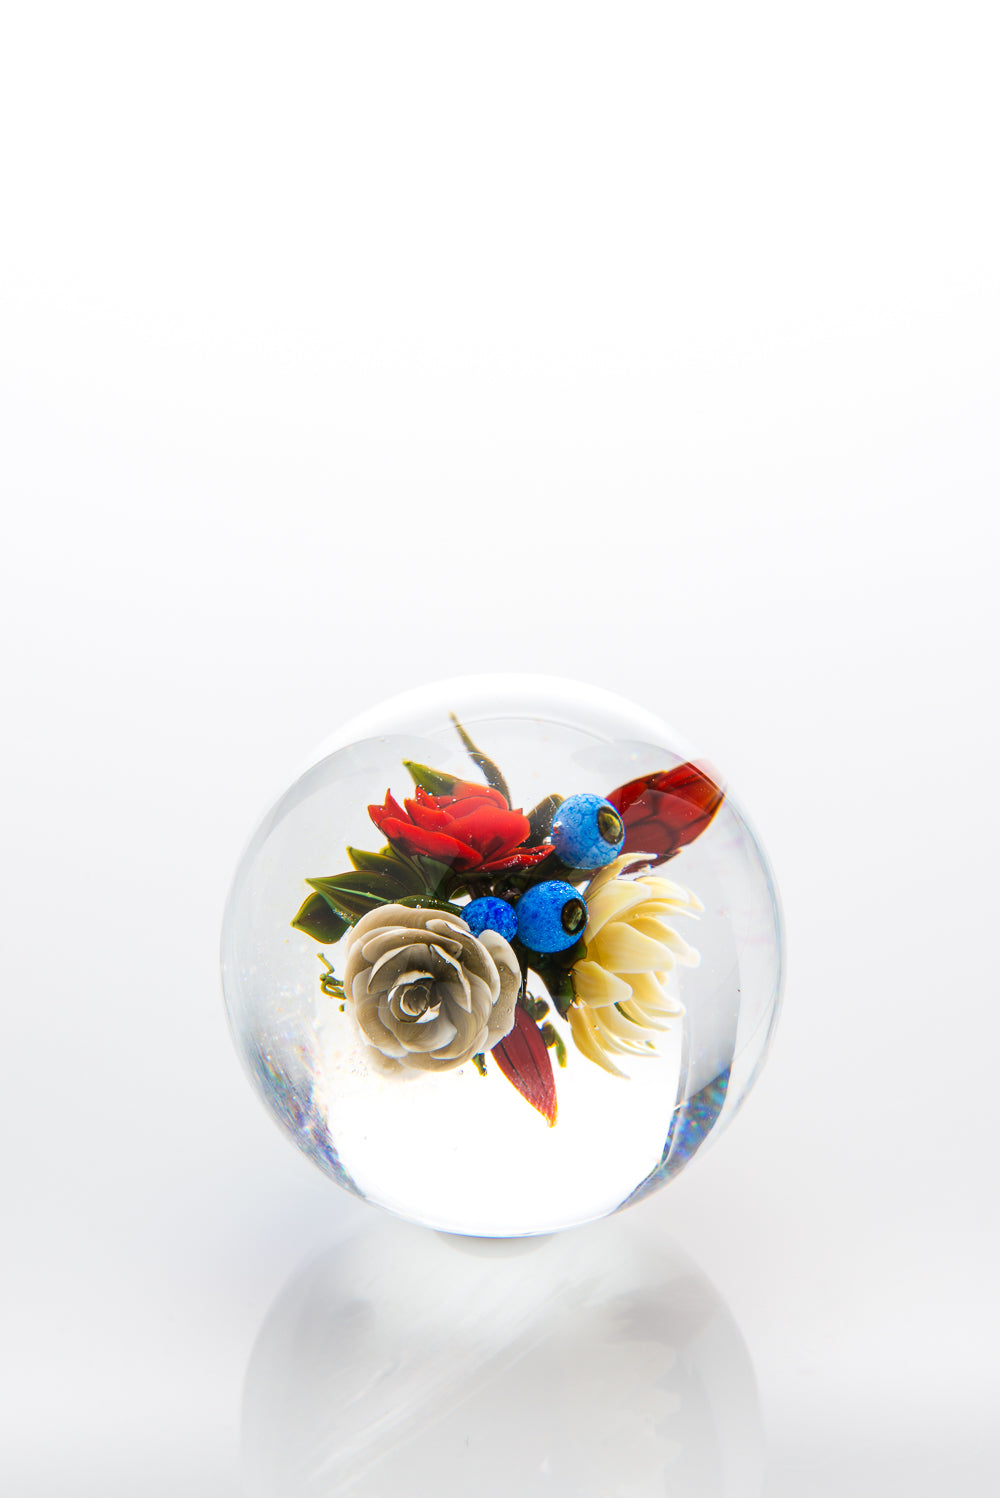 Two Inch Marble with Floral Arrangement by Akihiro Okama